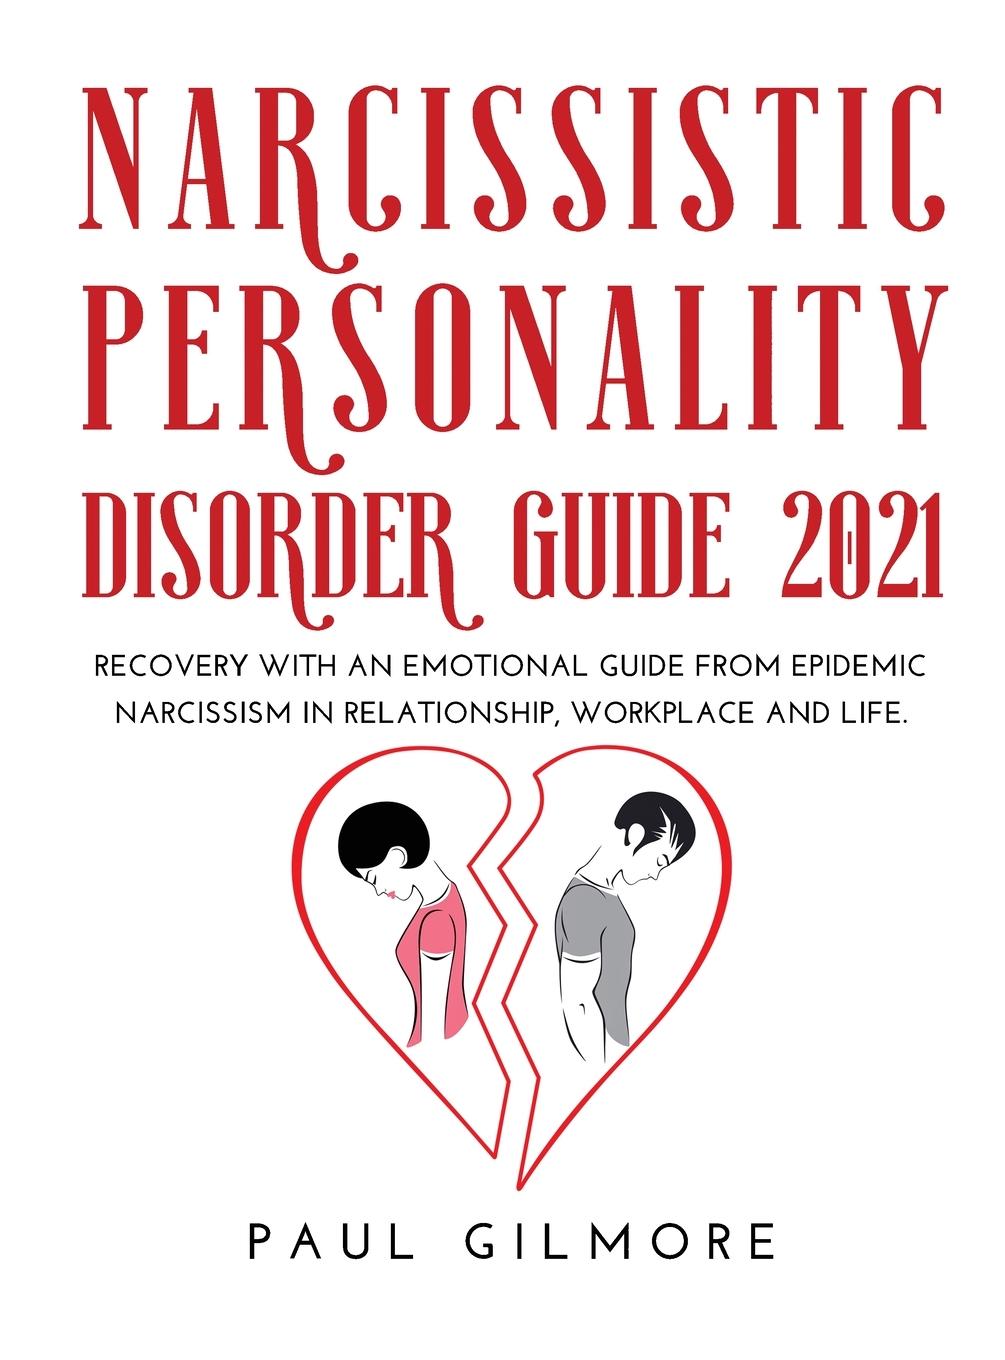 Kniha Narcissistic Personality Disorder Guide 2021 